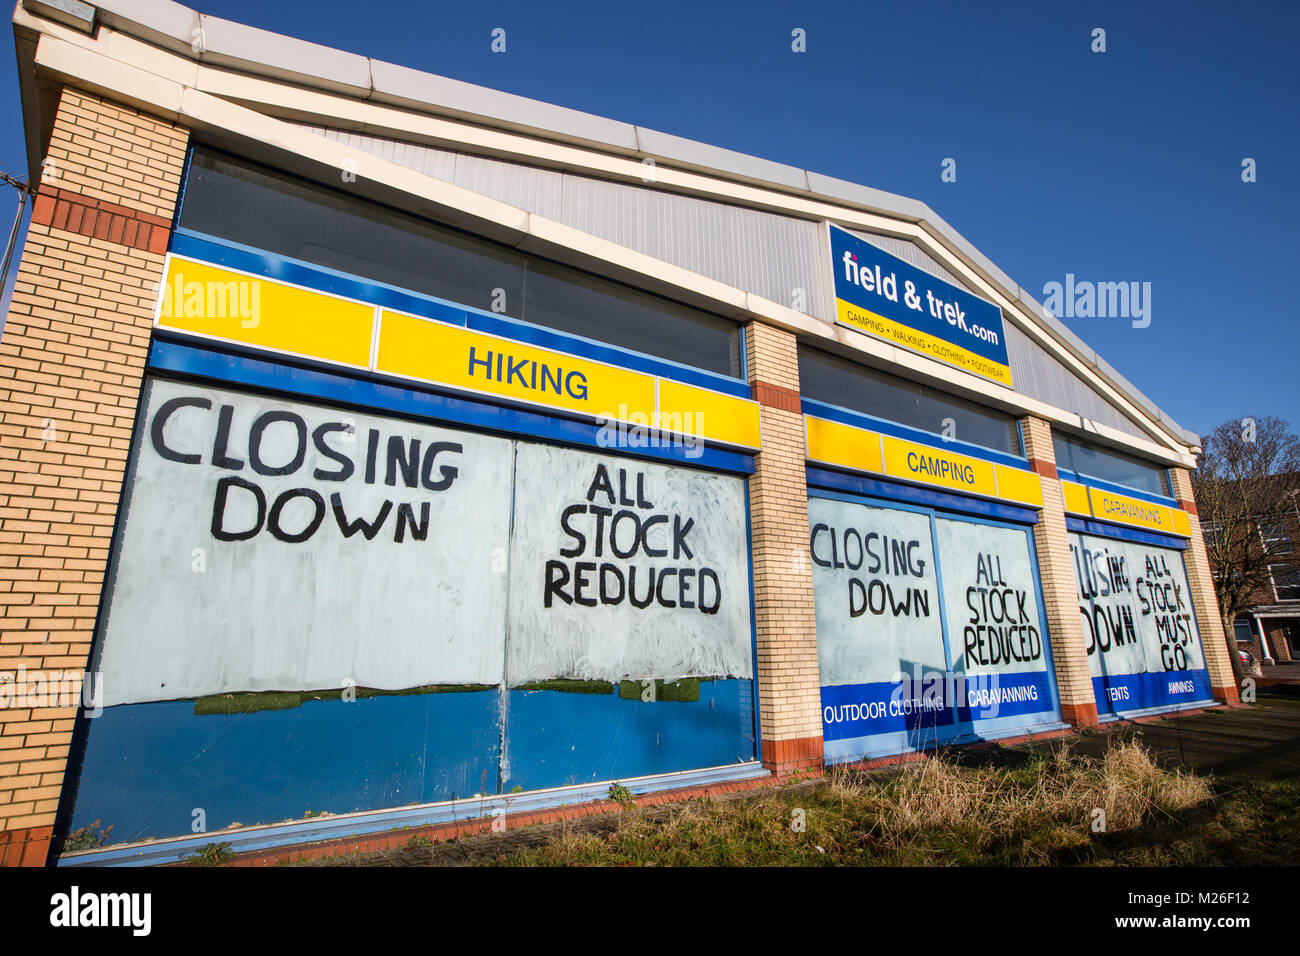 Field and Trek outdoor store closed down in Southampton, UK Stock Photo